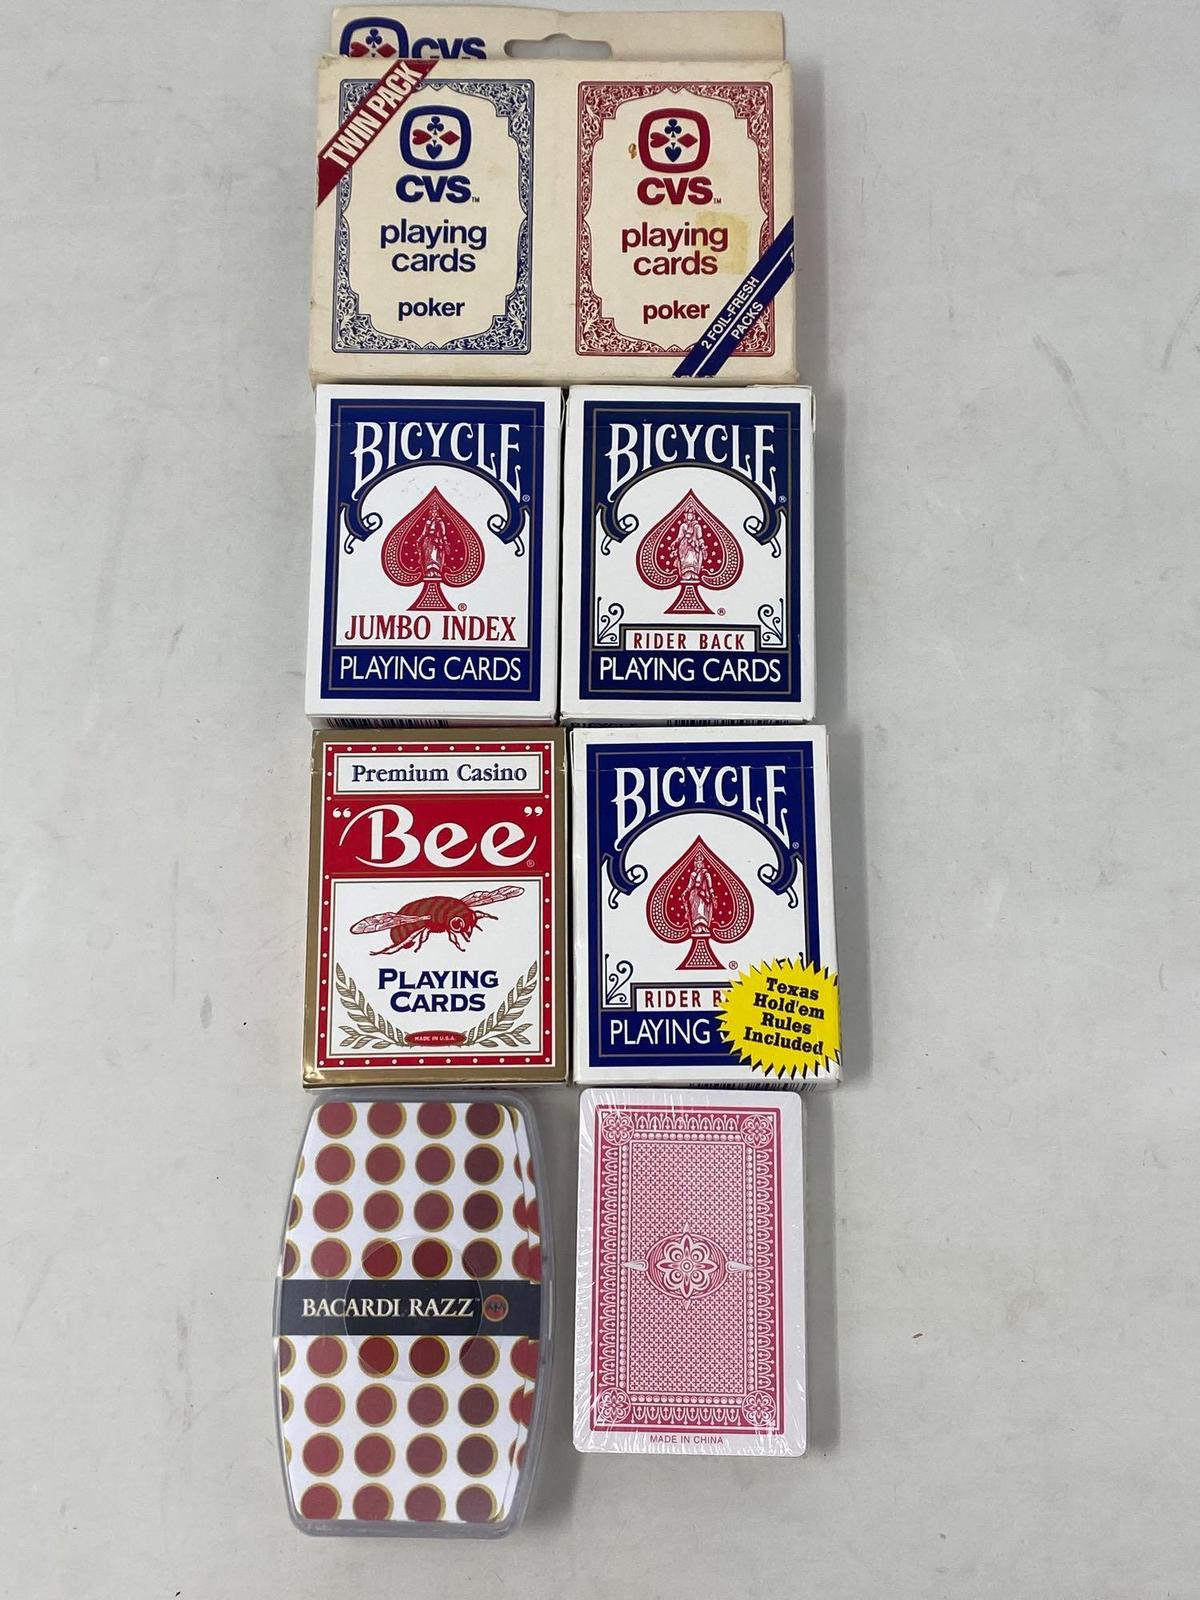 Playing Cards- CVS, Bicycle, Bee